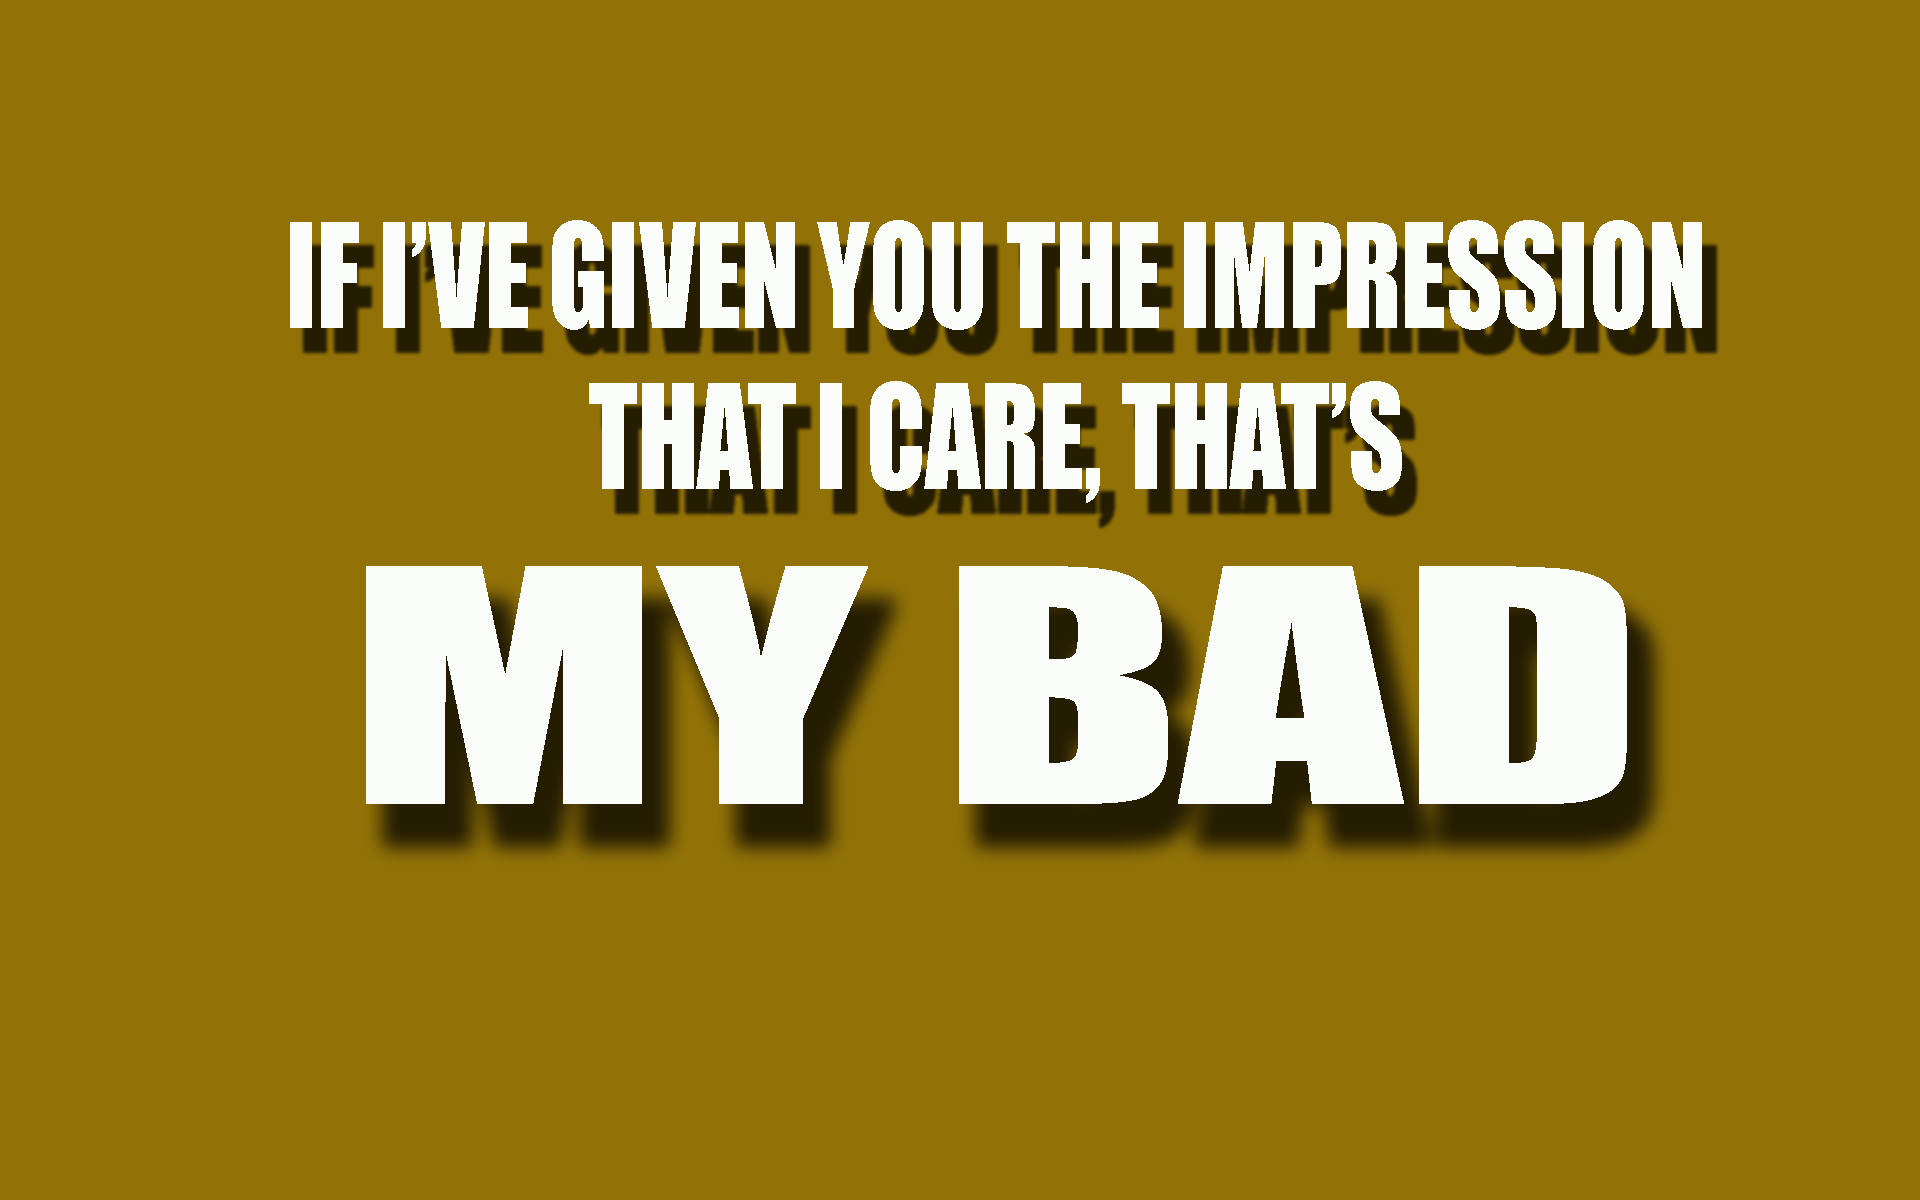 Fun Computer Backgrounds Png - Funny Background Memes - 1920x1200 Wallpaper  